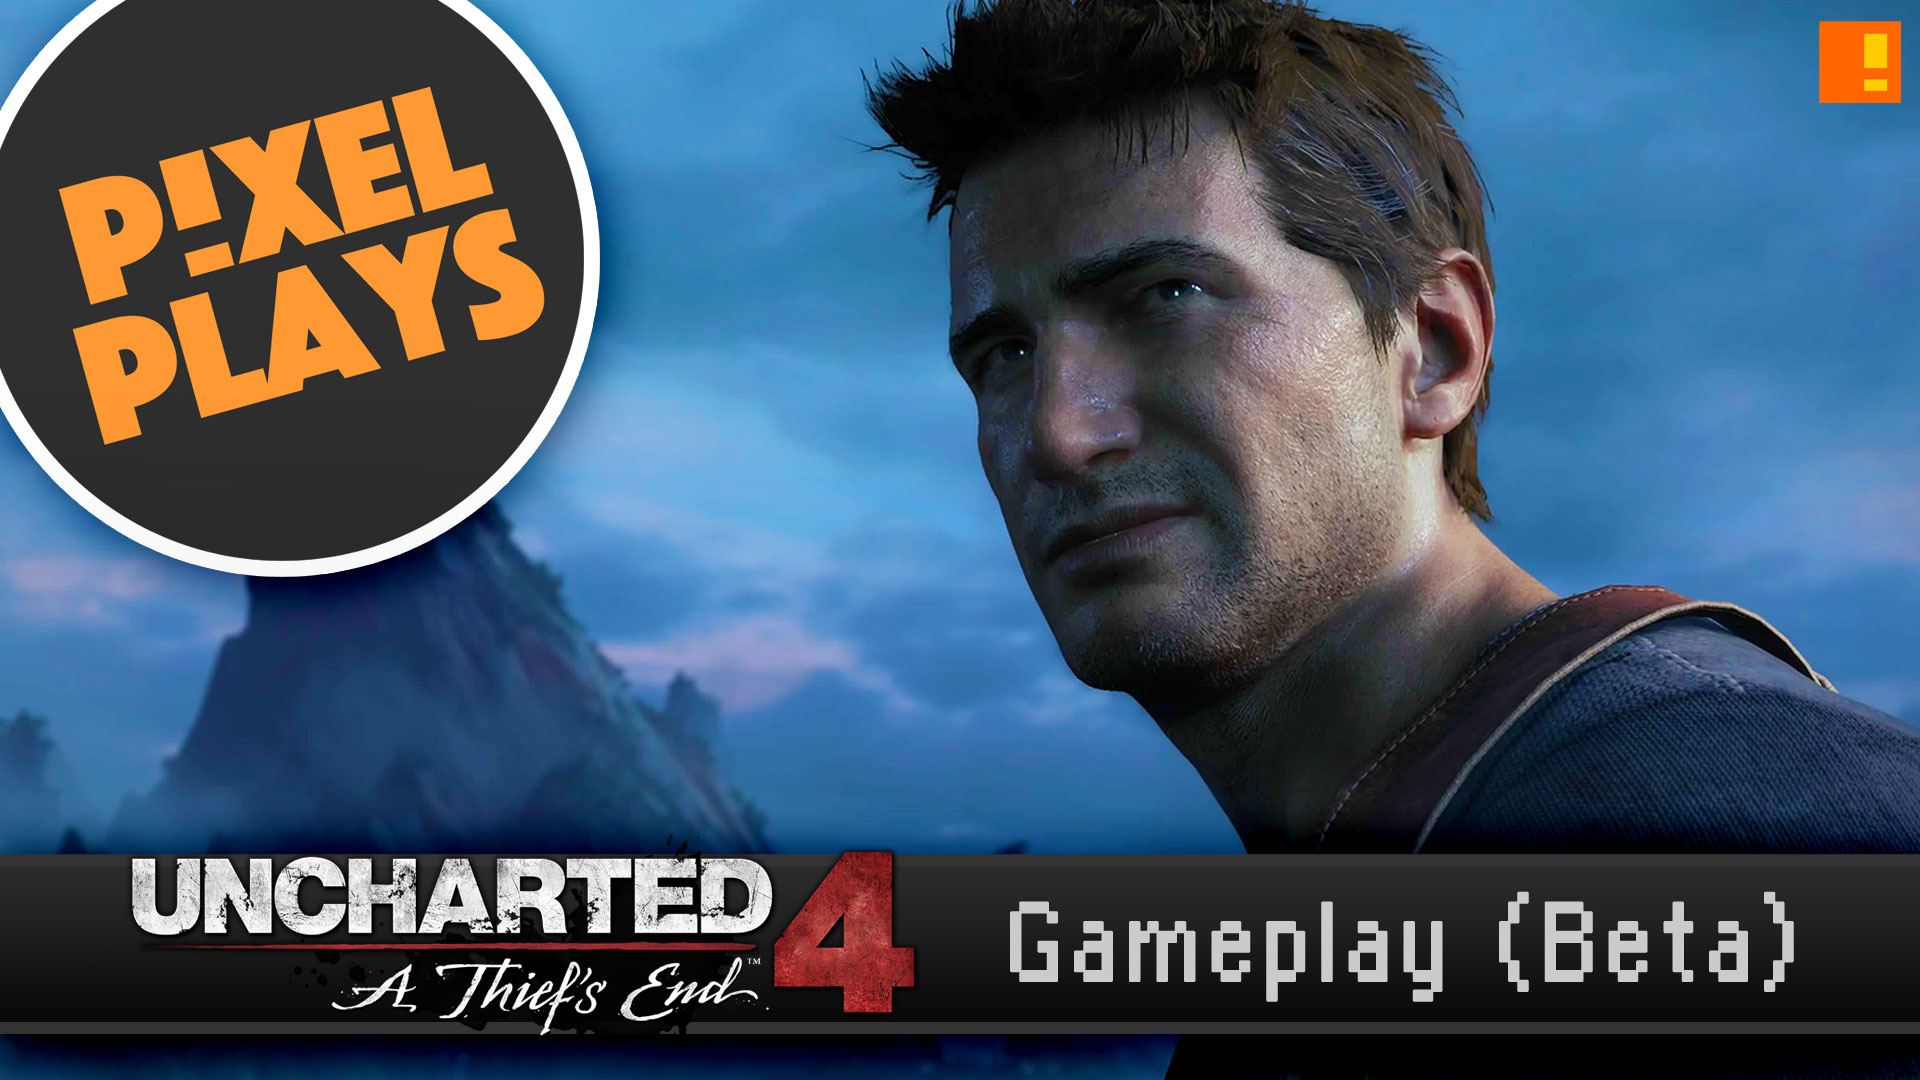 uncharted 4, nathan drake, uncharted 4 release date, uncharted 4 review, uncharted 4 ps4, uncharted 4 gameplay, uncharted 4 ps4 bundle, uncharted 4 multiplayer, uncharted 4 beta, uncharted 4 special edition, uncharted 4 ps3, uncharted 4 xbox one, uncharted 4 trailer, uncharted 4 release, uncharted 4 a thief's end, uncharted 4 a thief's end libertalia collector's edition, uncharted 4 a thief's end release date, uncharted 4 a thief's end special edition, uncharted 4 a thief's end trailer, uncharted 4 a thief's end gameplay,release date, pixel plays, the action pixel, entertainment, youtube gaming, let's play,